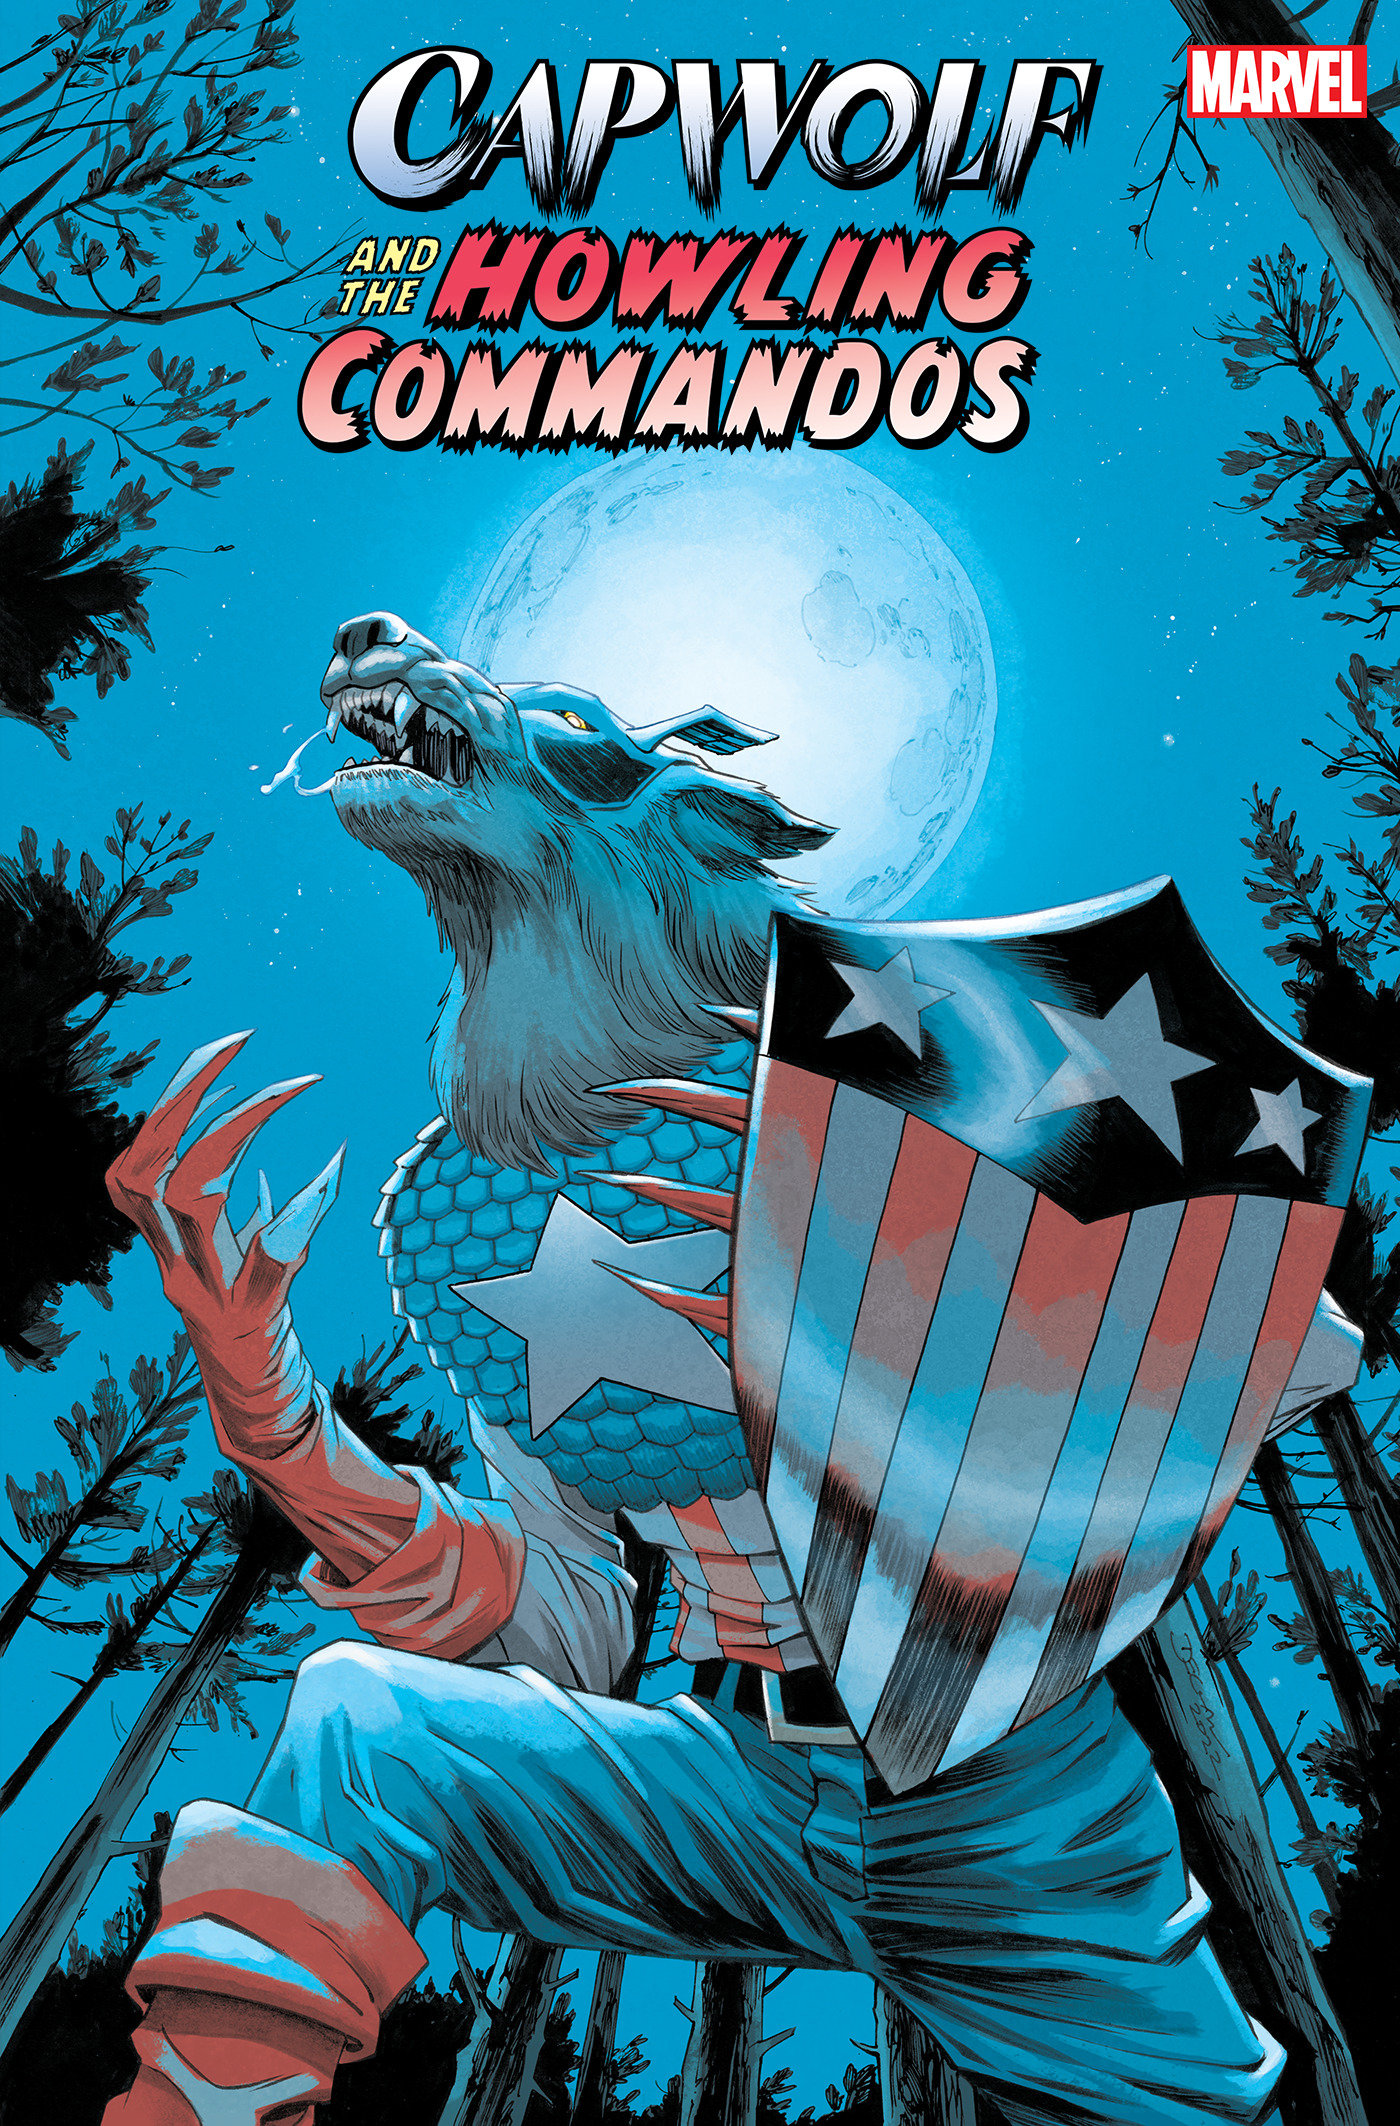 Capwolf & the Howling Commandos #1 Declan Shalvey Variant 1 for 25 Incentive